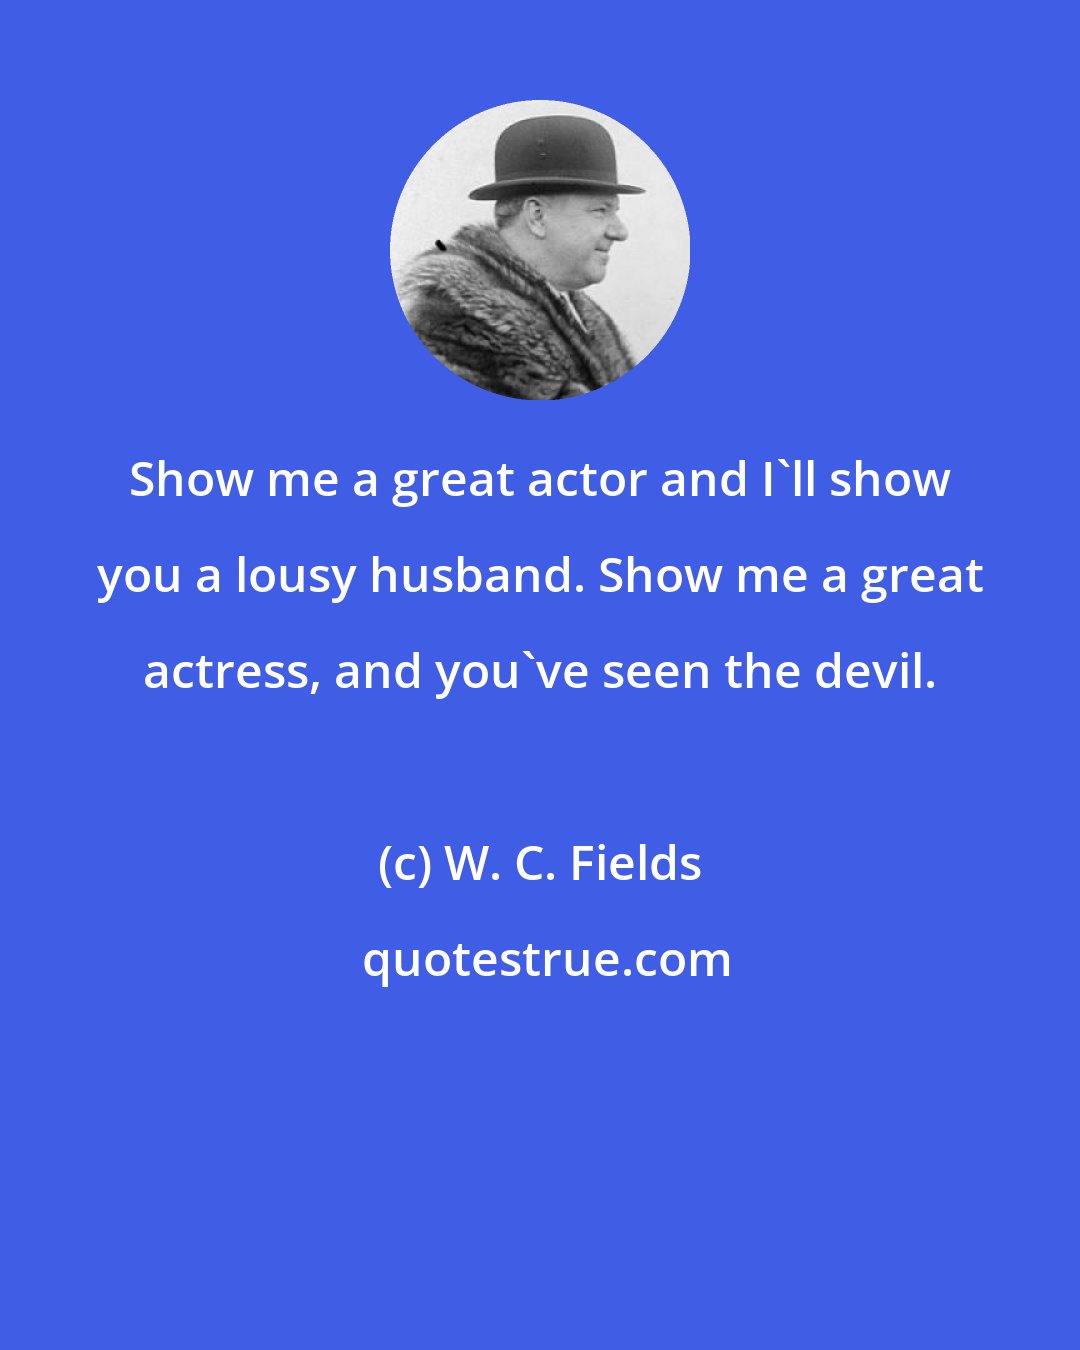 W. C. Fields: Show me a great actor and I'll show you a lousy husband. Show me a great actress, and you've seen the devil.